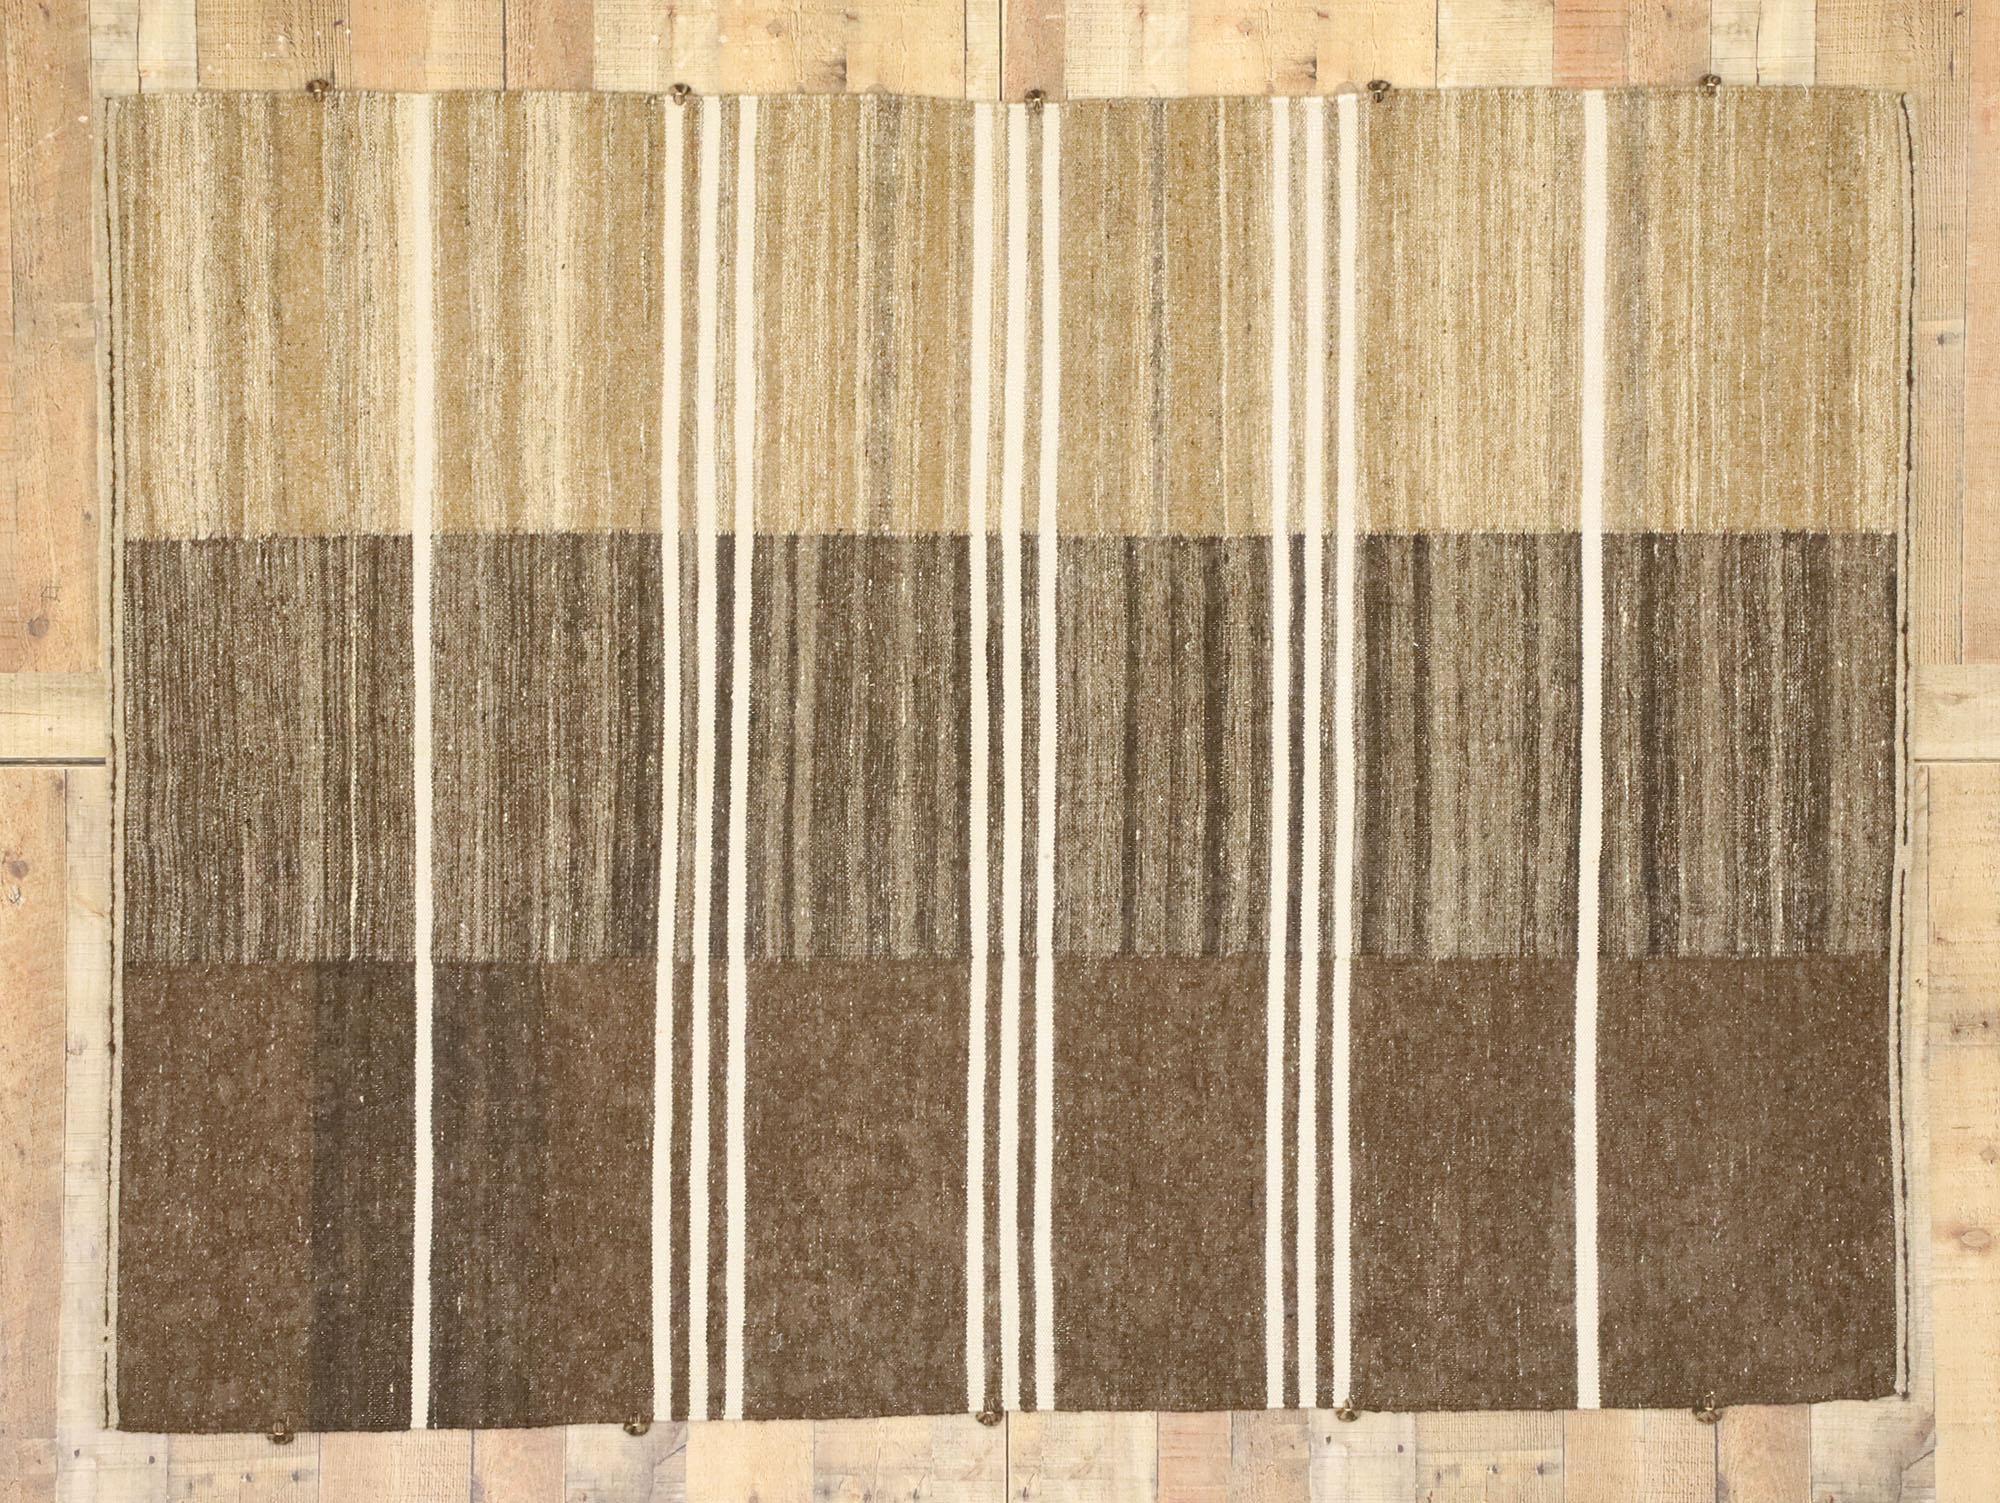 New Contemporary Striped Kilim Rug with Modern Style, Brown Flat-Weave Rug 2